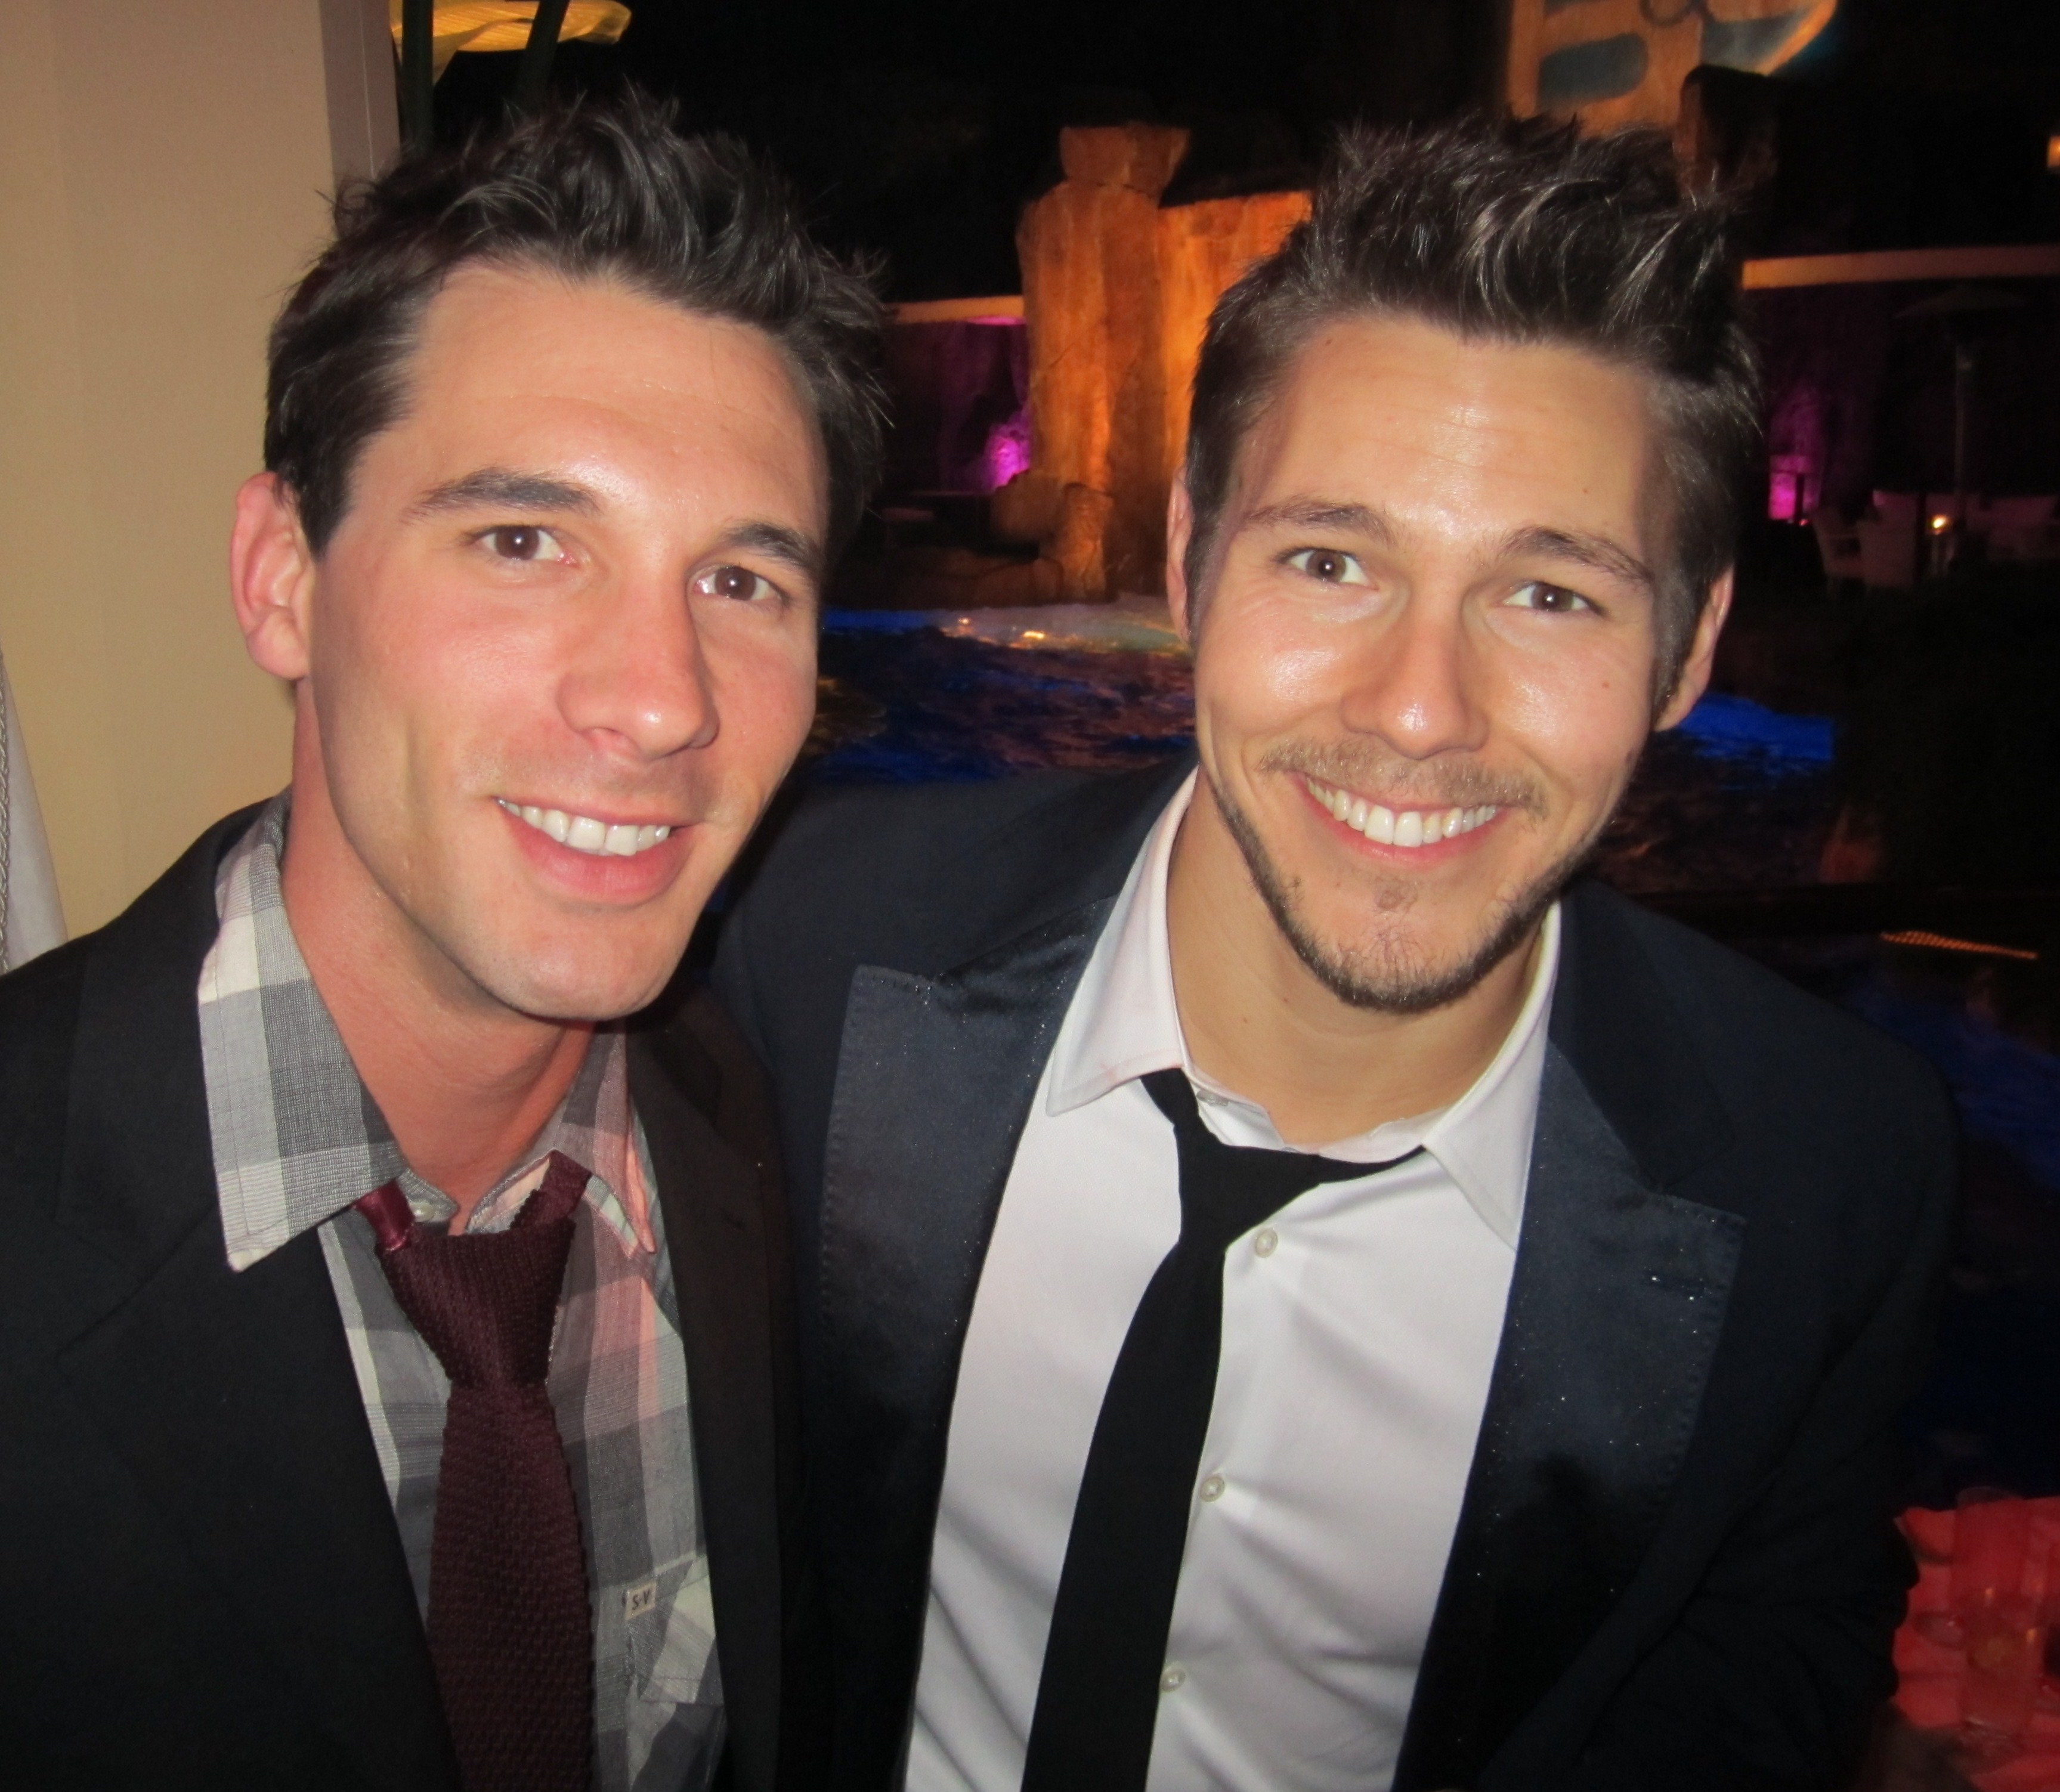 38th Annual DAYTIME EMMY AWARDS with EMMY WINNER Scott Clifton, star of CBS-THE BOLD AND THE BEAUTIFUL for Outstanding Younger Actor, 2011